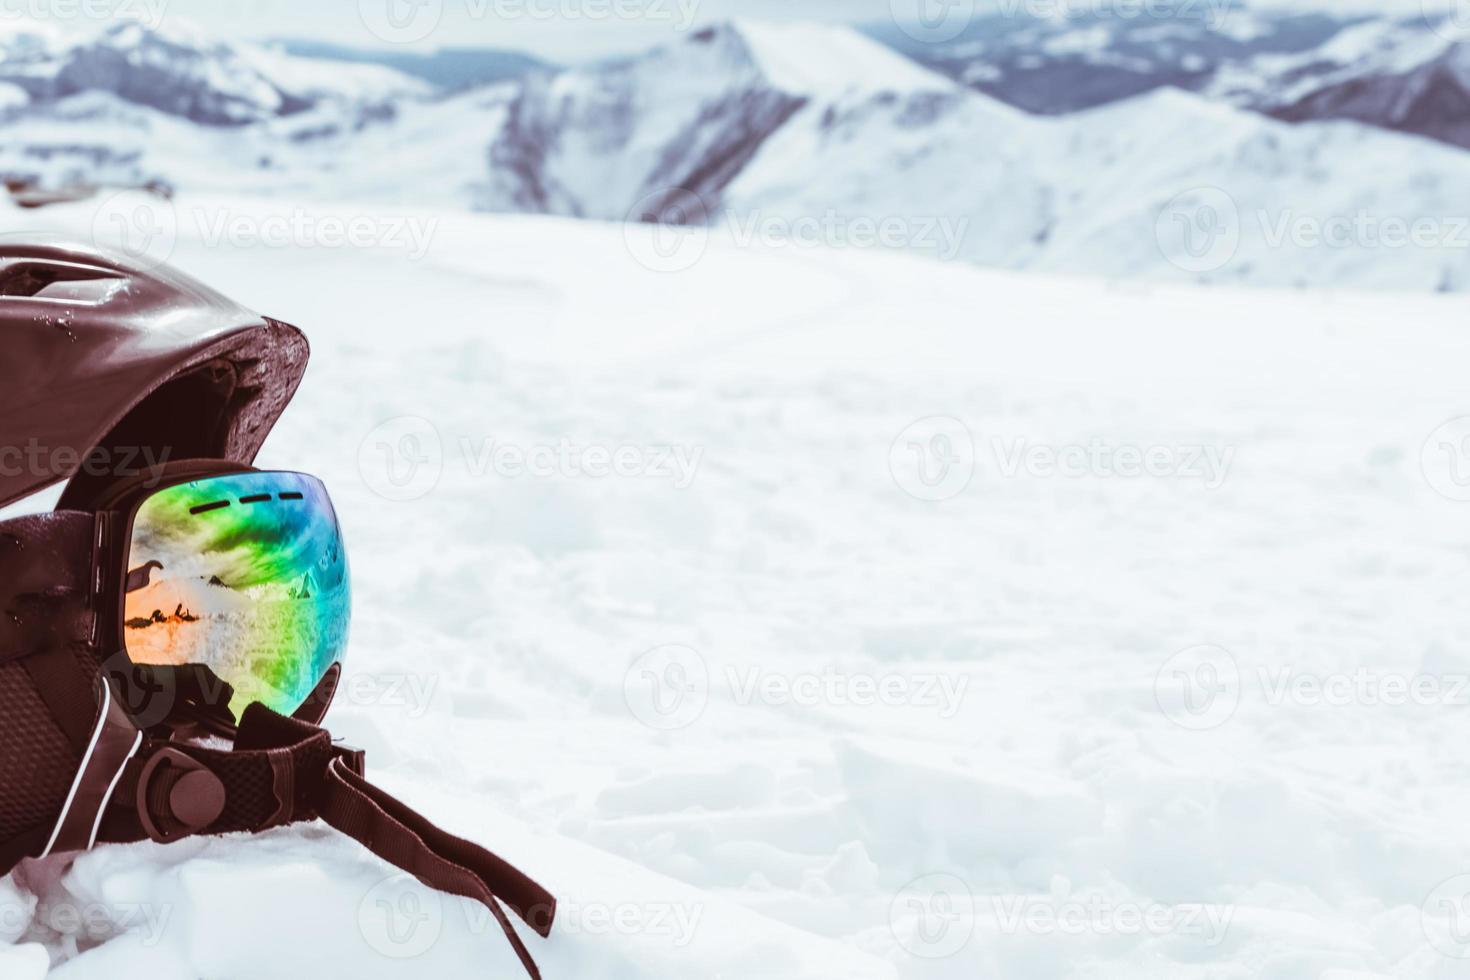 Black helmet with skiing goggles on snow with white snowy mountains landscape background photo